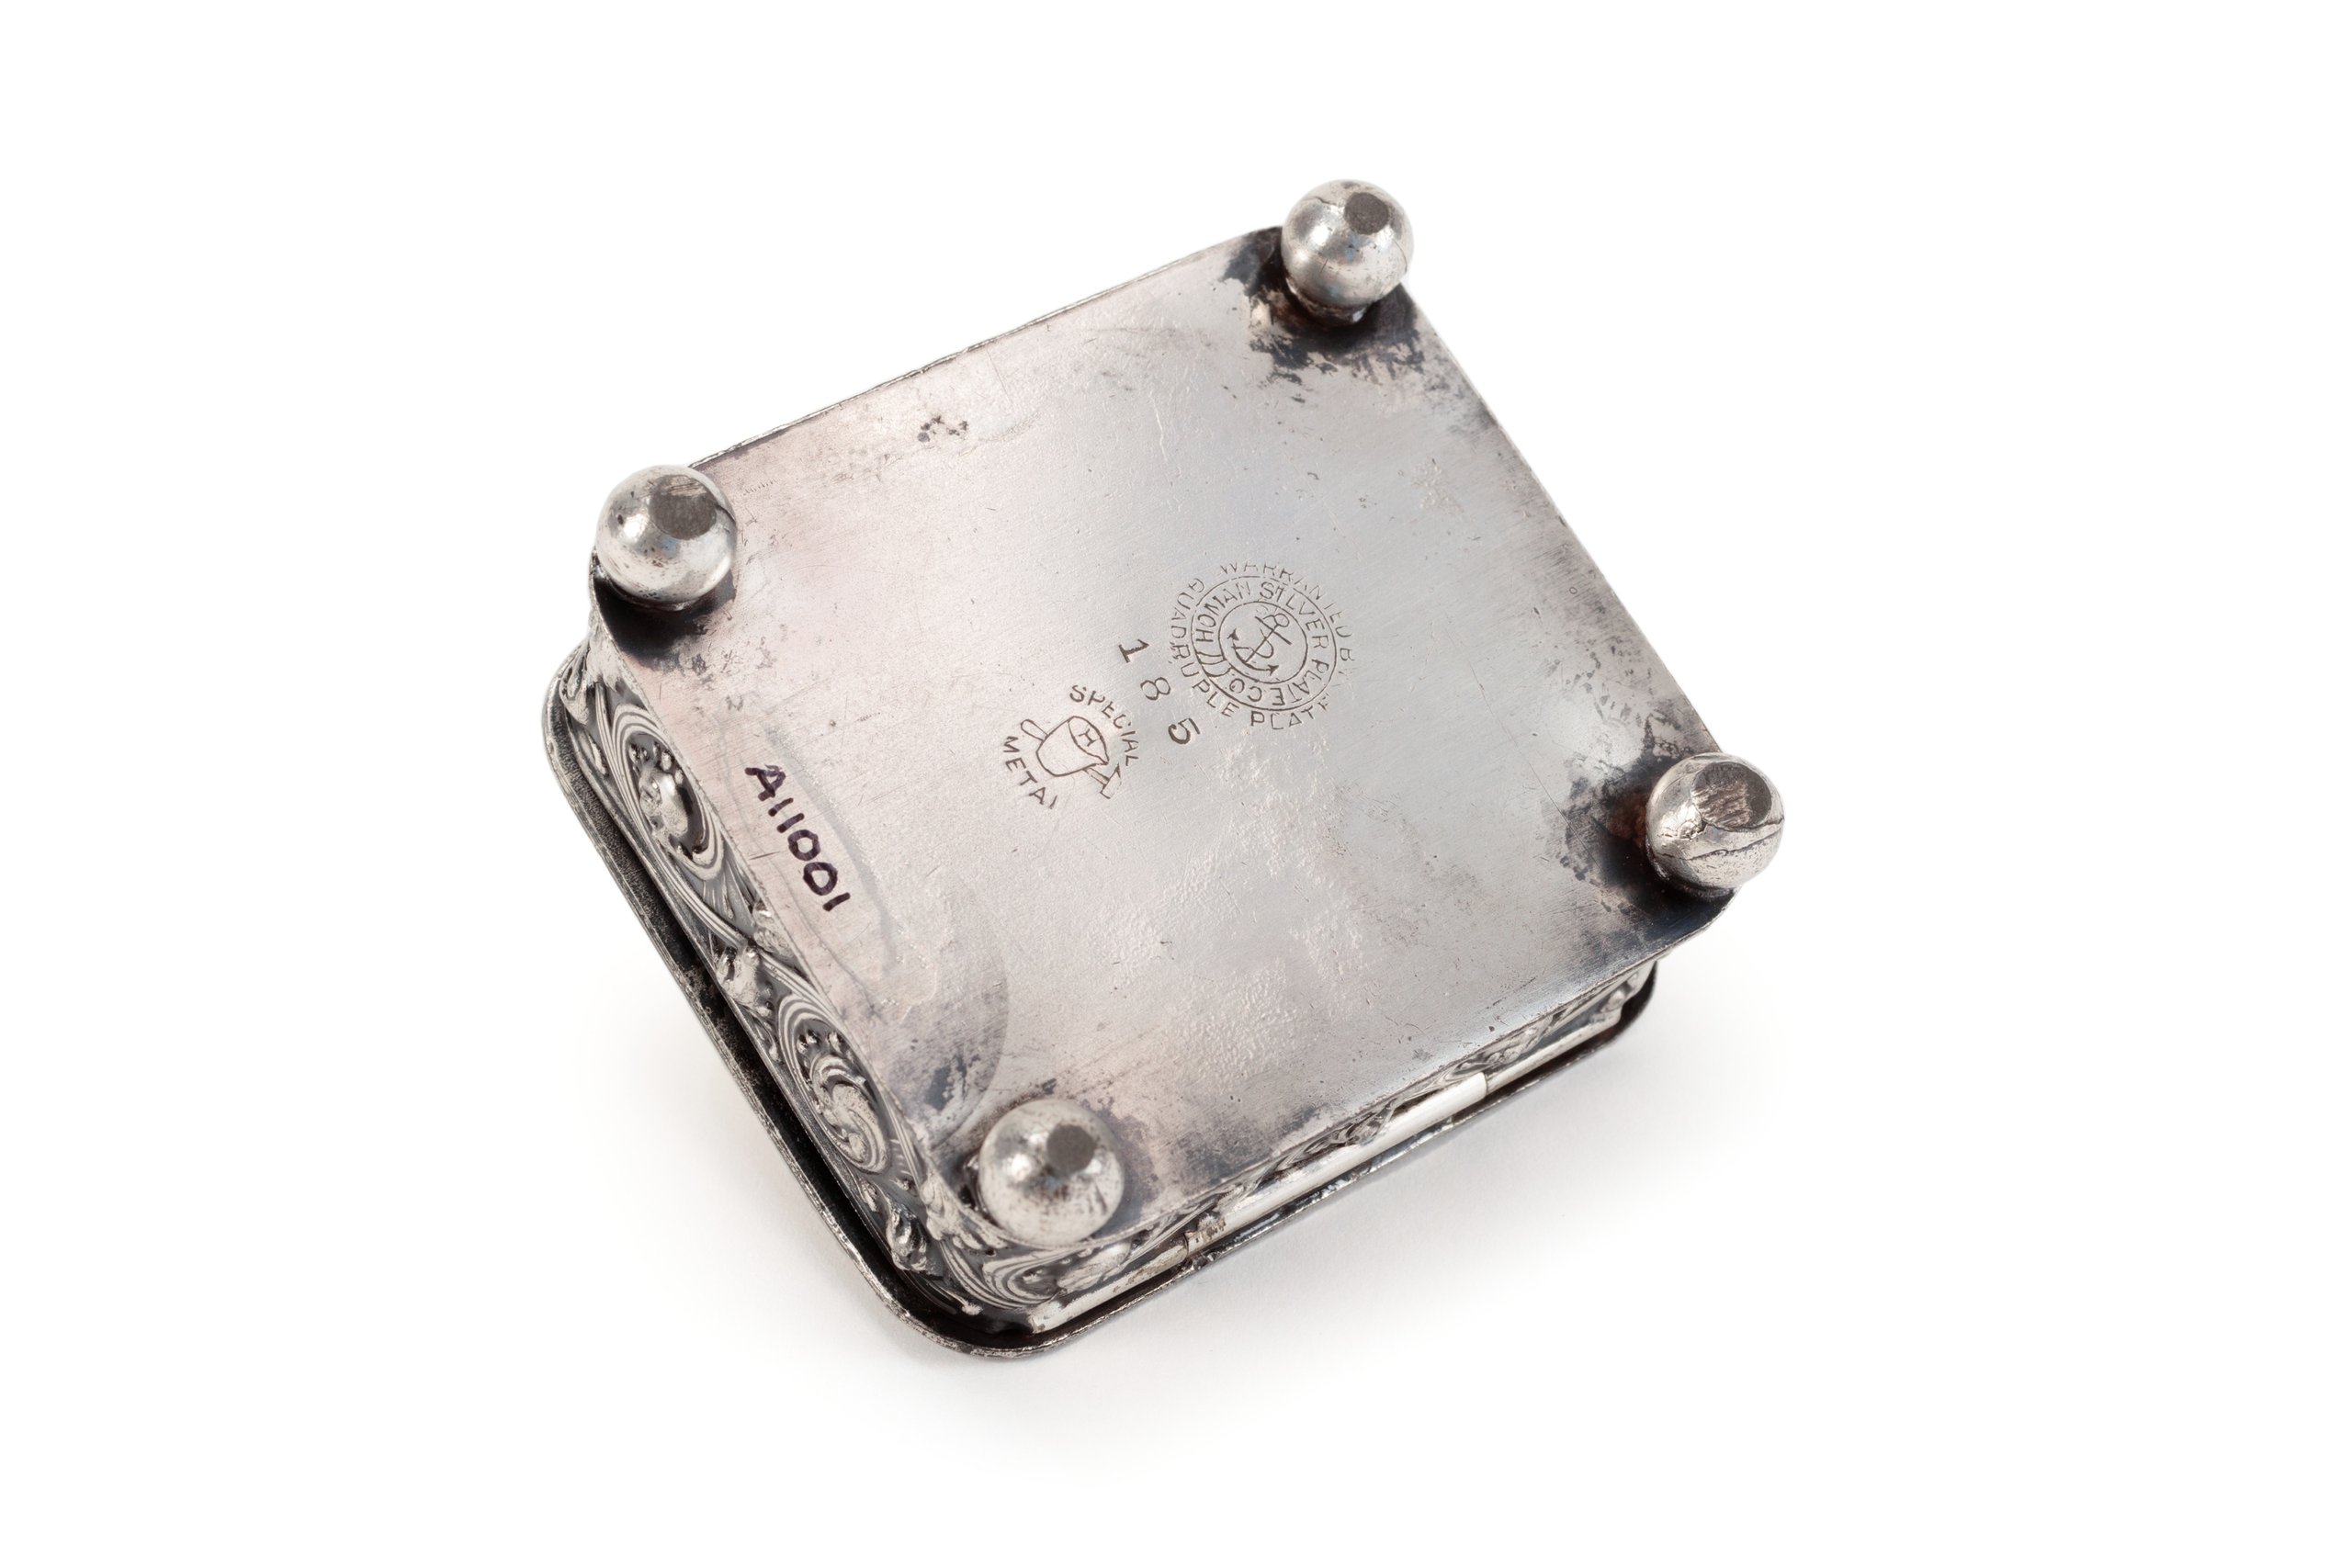 Electroplated nickel silver stud box